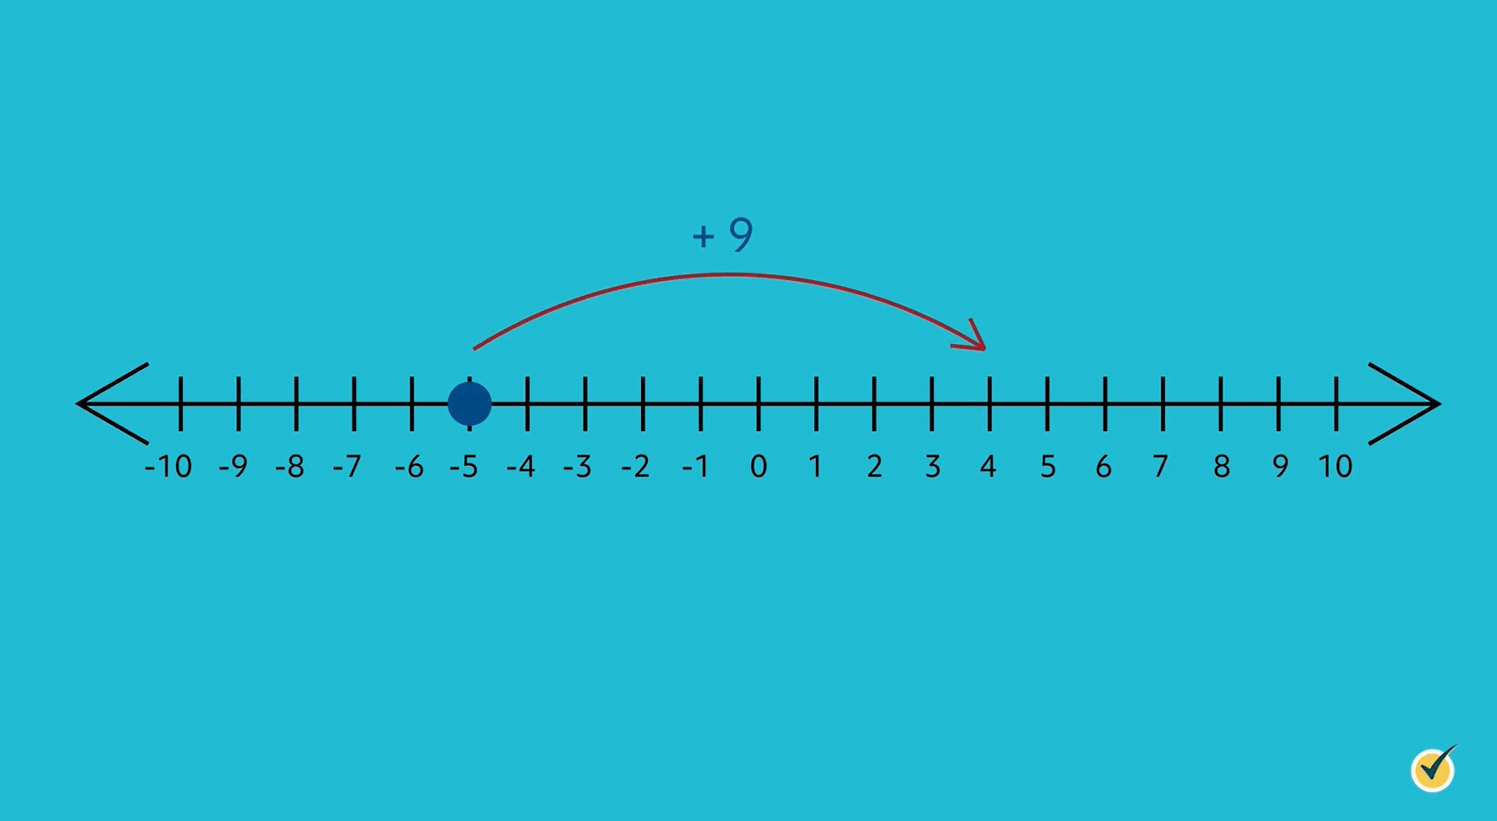 Number line with arrow pointing from -5 to +4